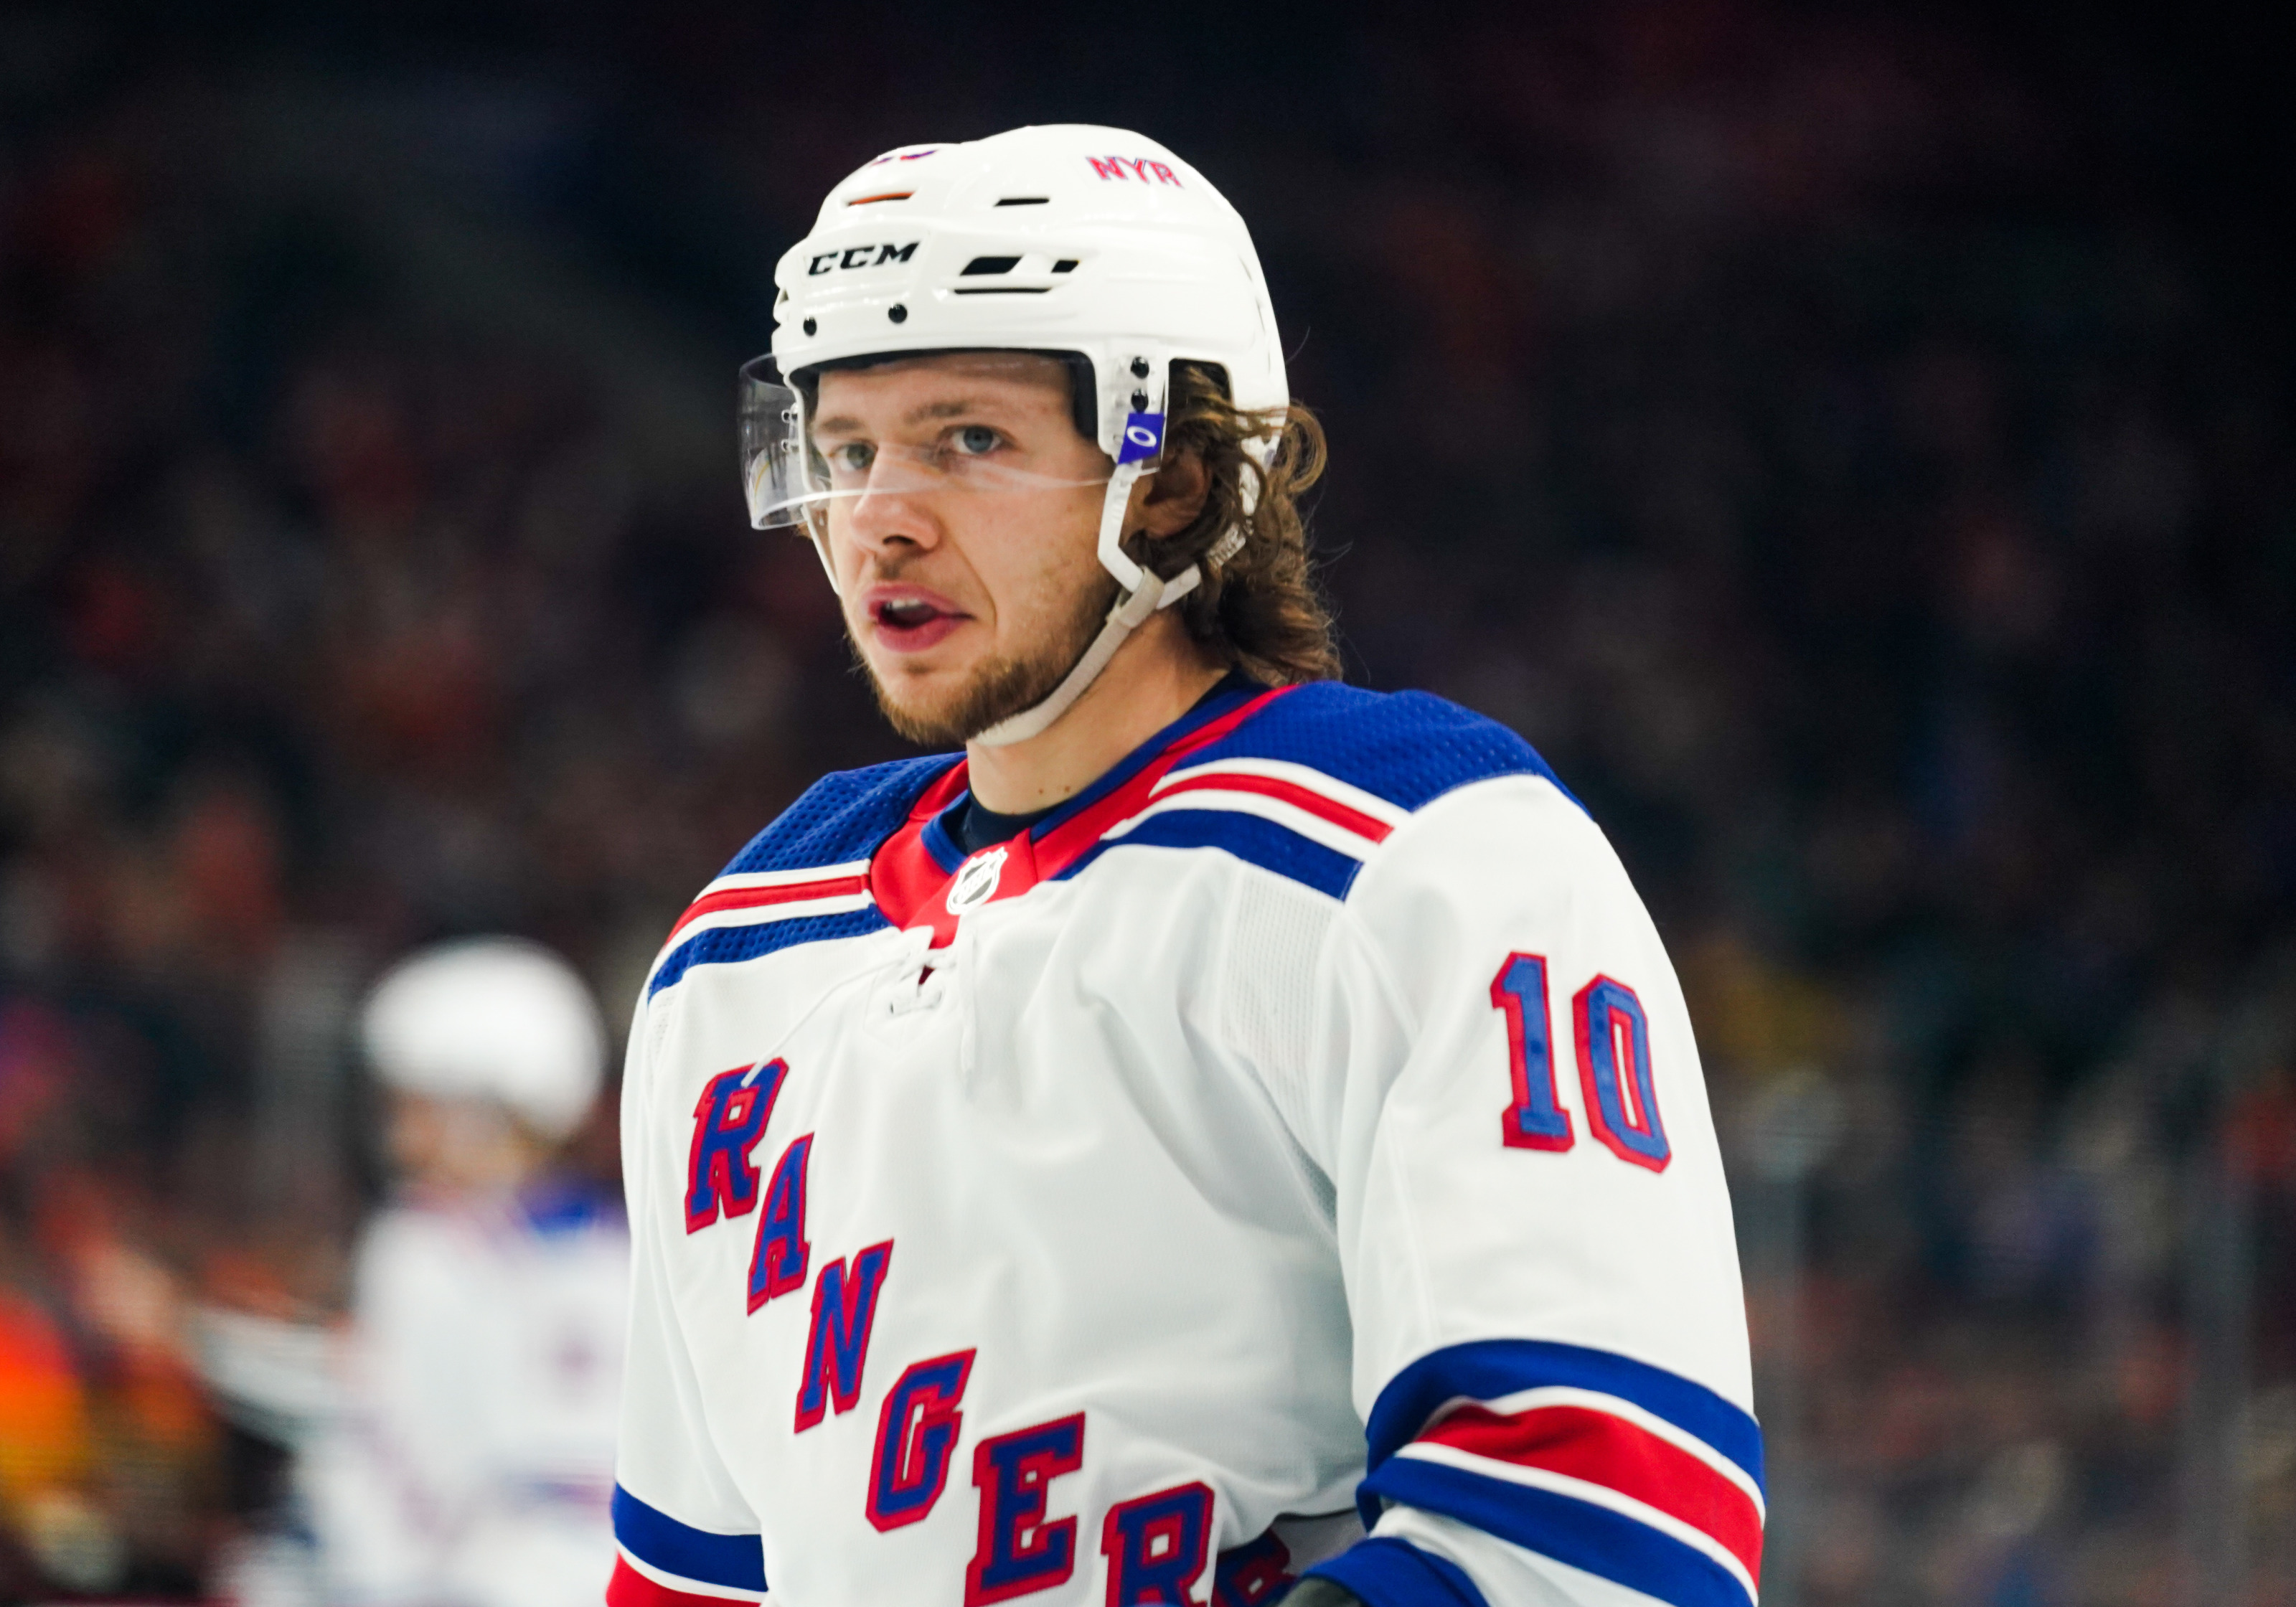 New York Rangers - Roster. Is. In.